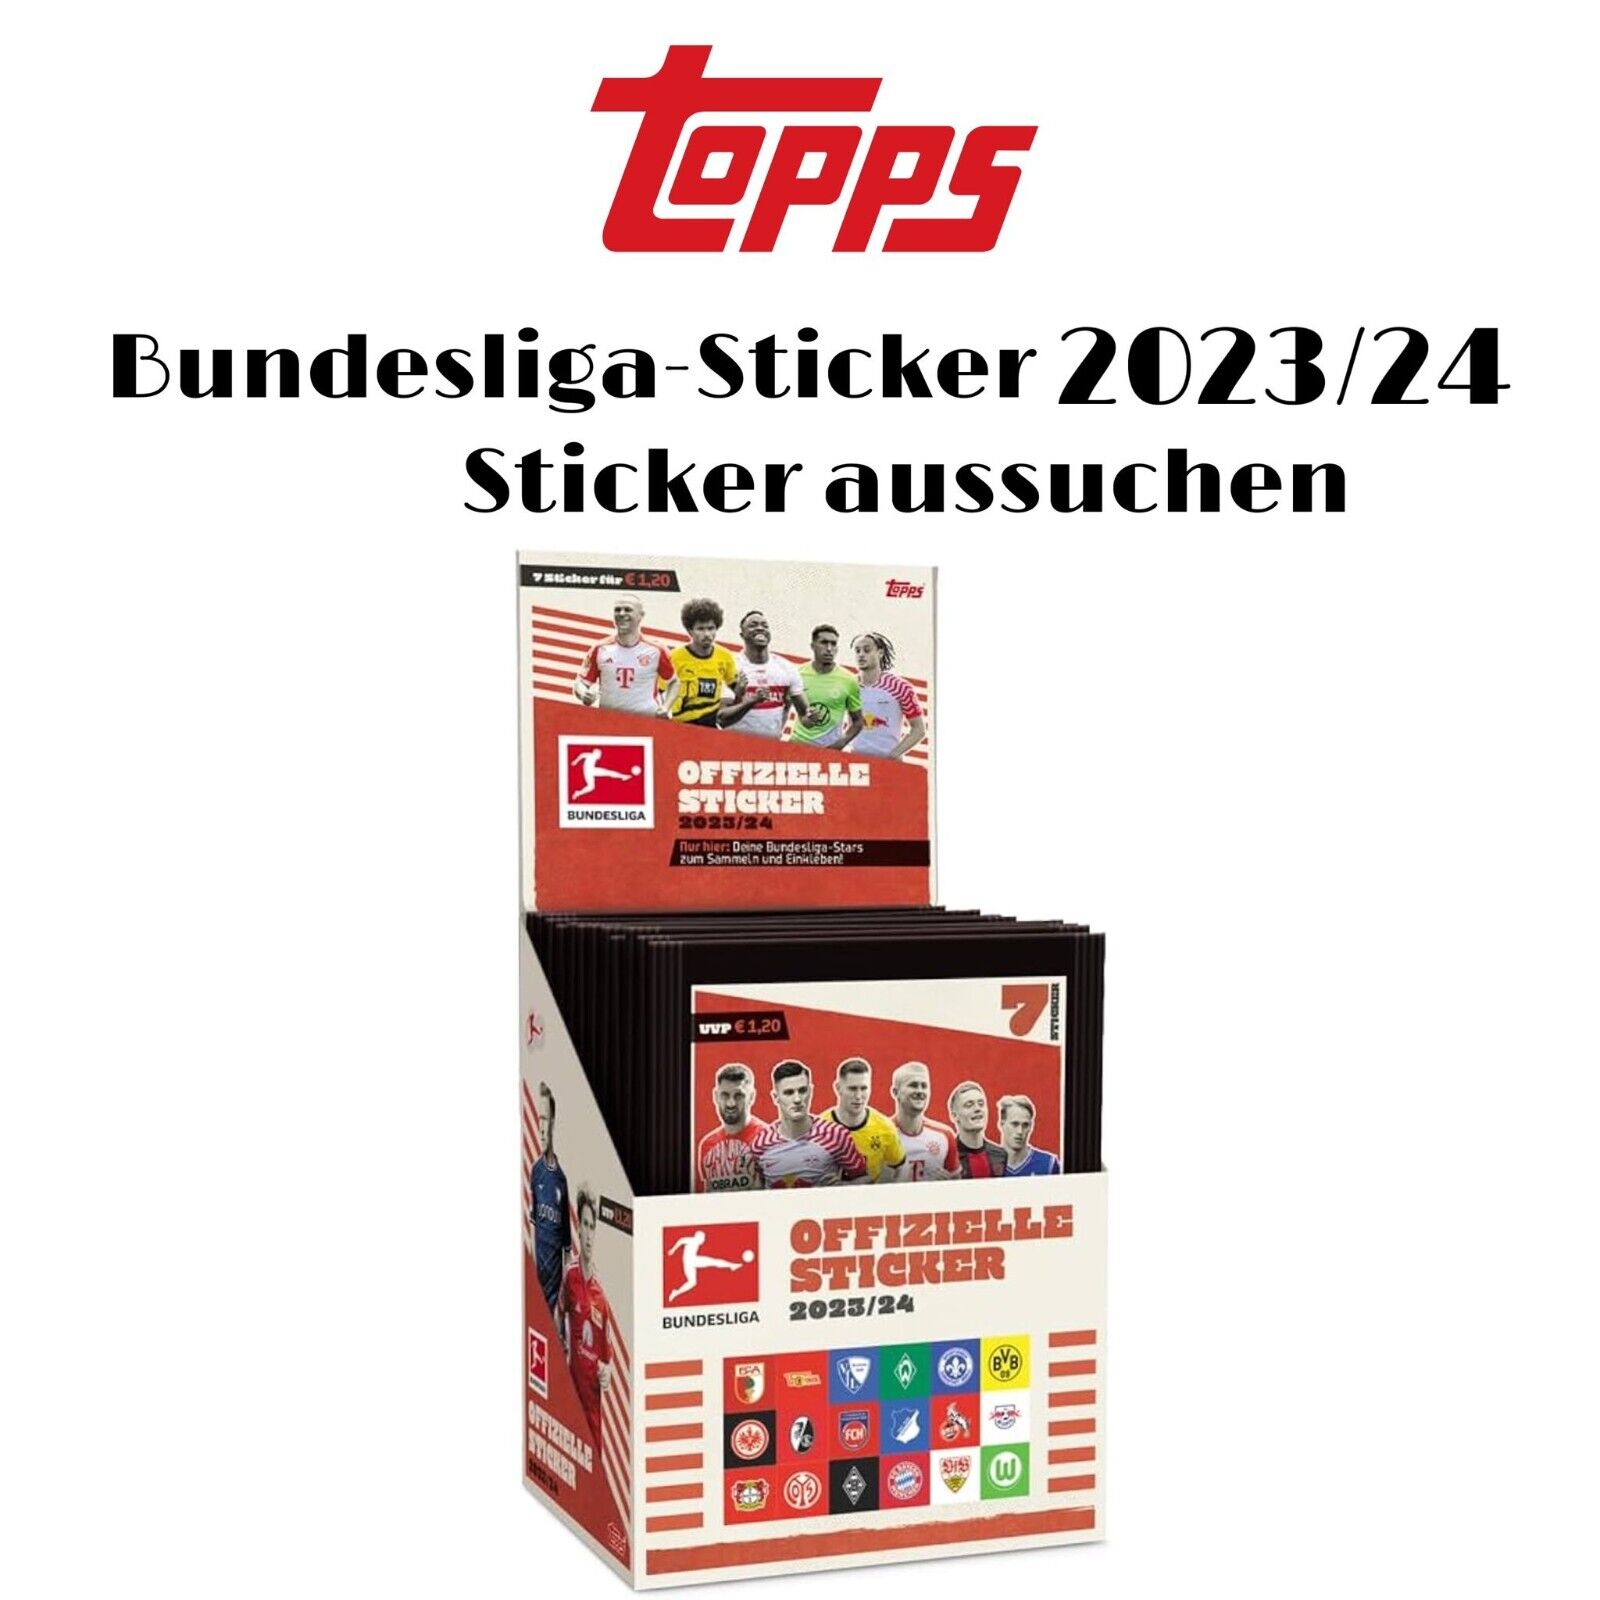 Topps Bundesliga Sticker 2023/24 - Choose Any Number of Stickers